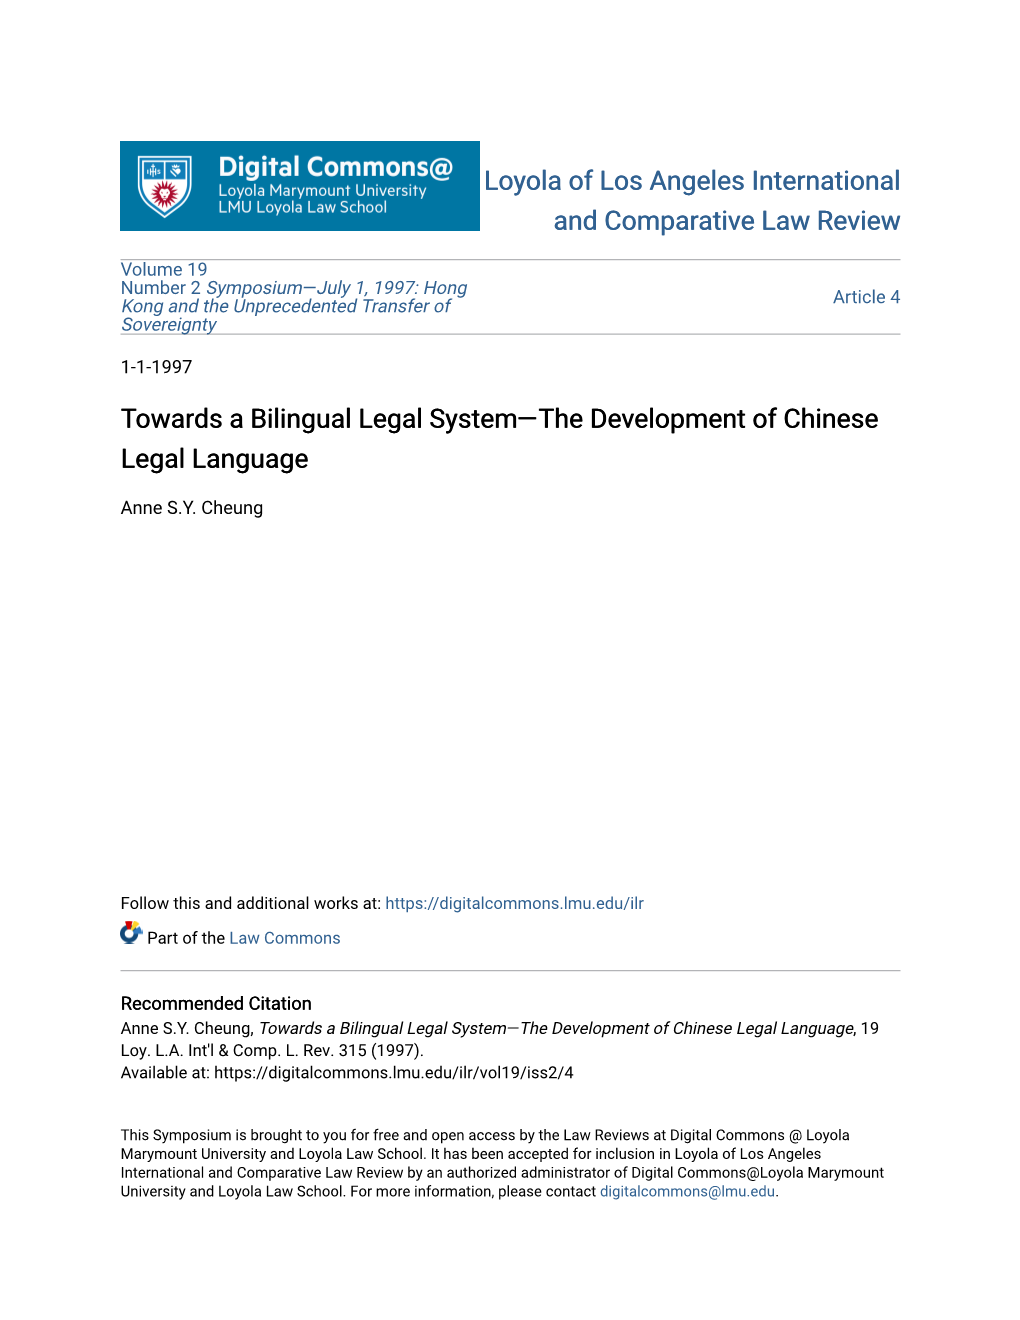 Towards a Bilingual Legal System—The Development of Chinese Legal Language